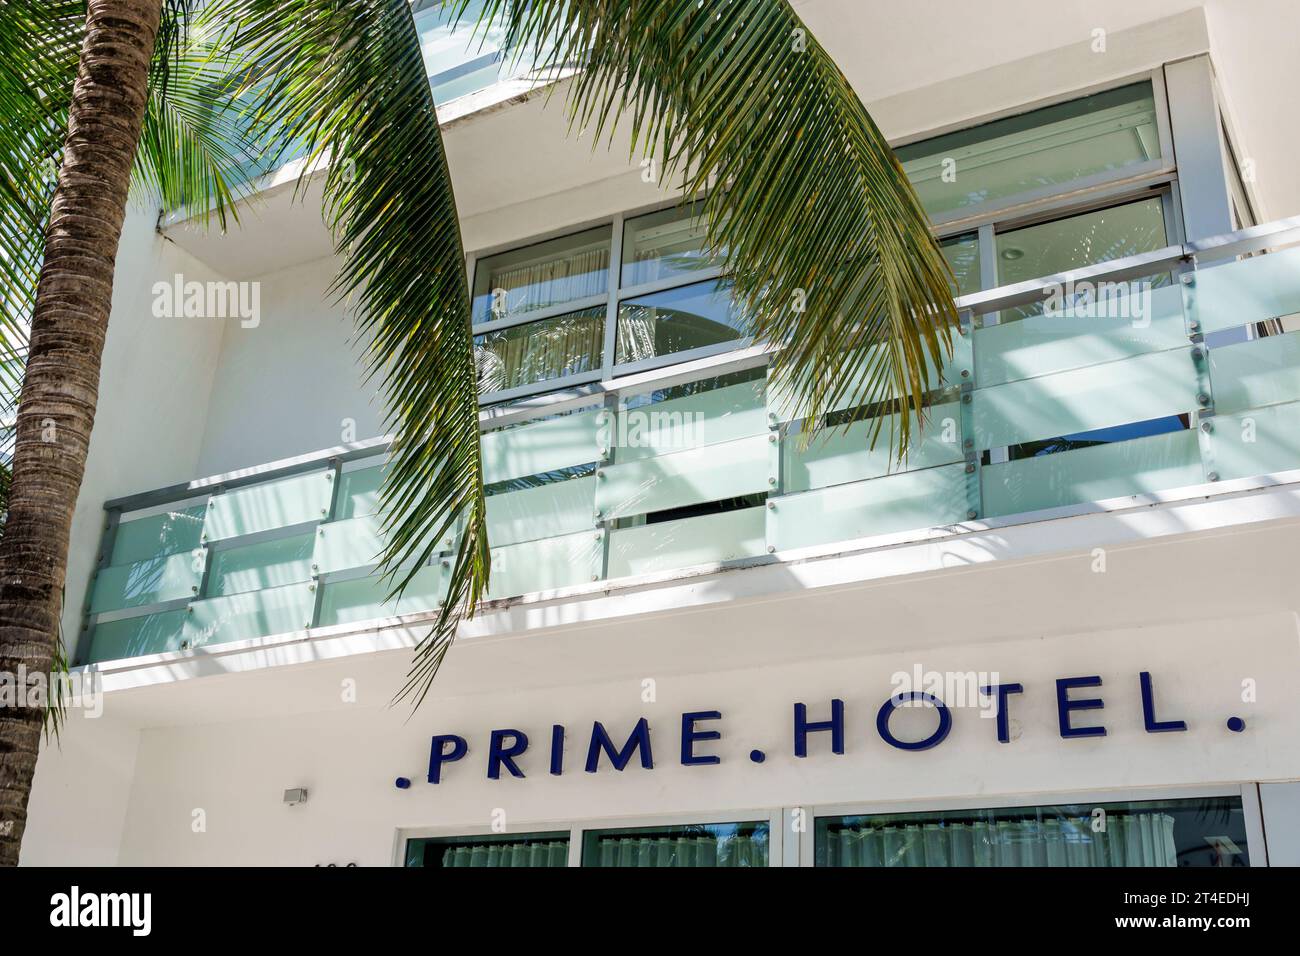 Miami Beach Florida,outside exterior,building front entrance hotel,Ocean Drive,Prime Hotel sign,hotels motels businesses Stock Photo